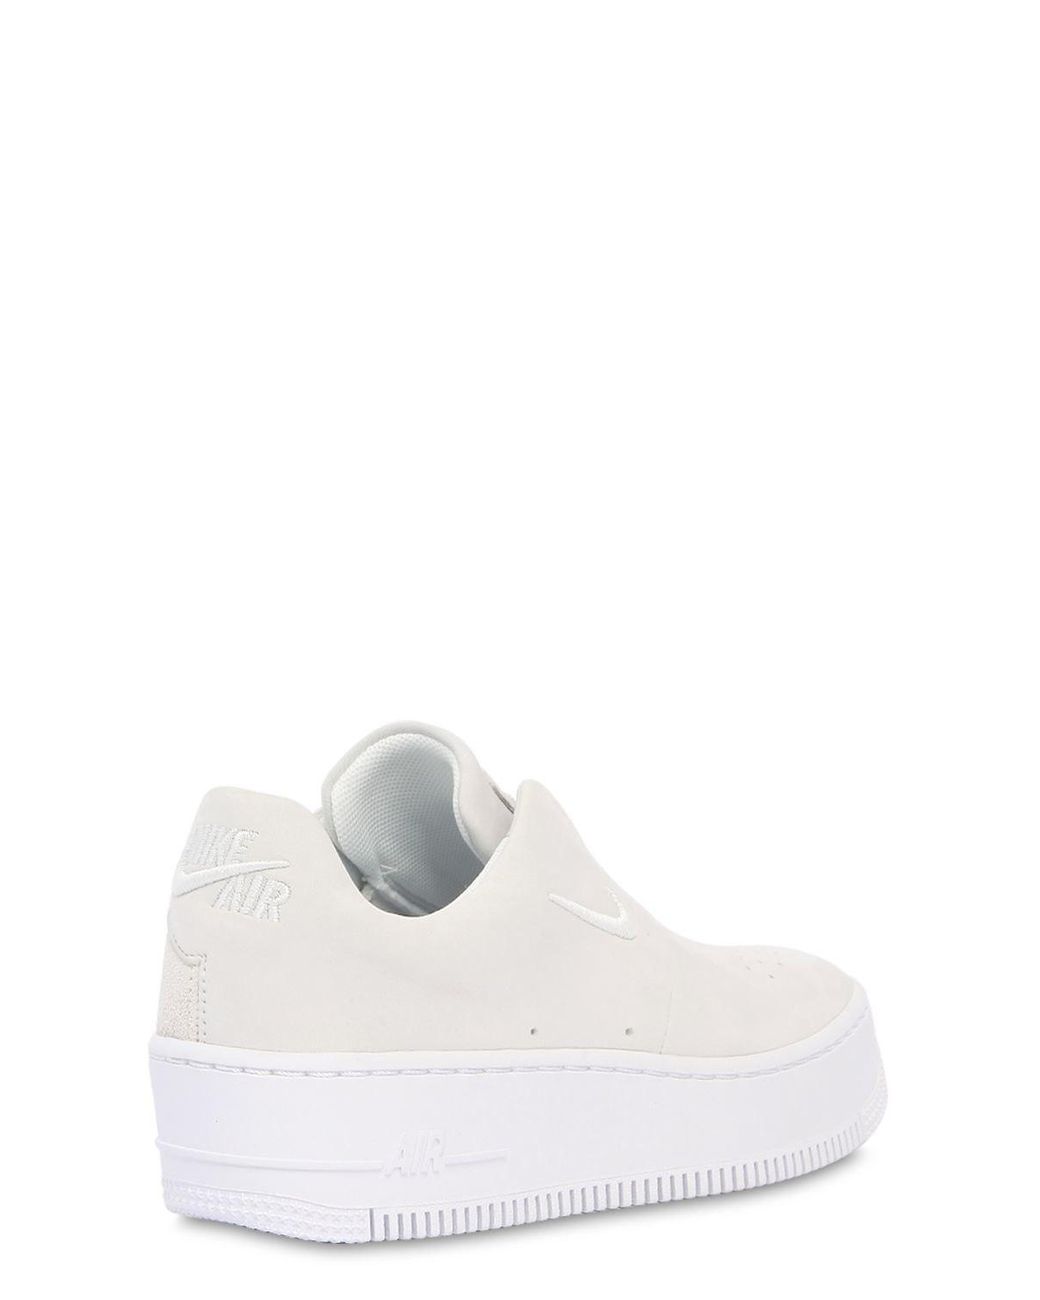 Nike Air Force 1 Sage Xx Slip-on Sneakers in White | Lyst